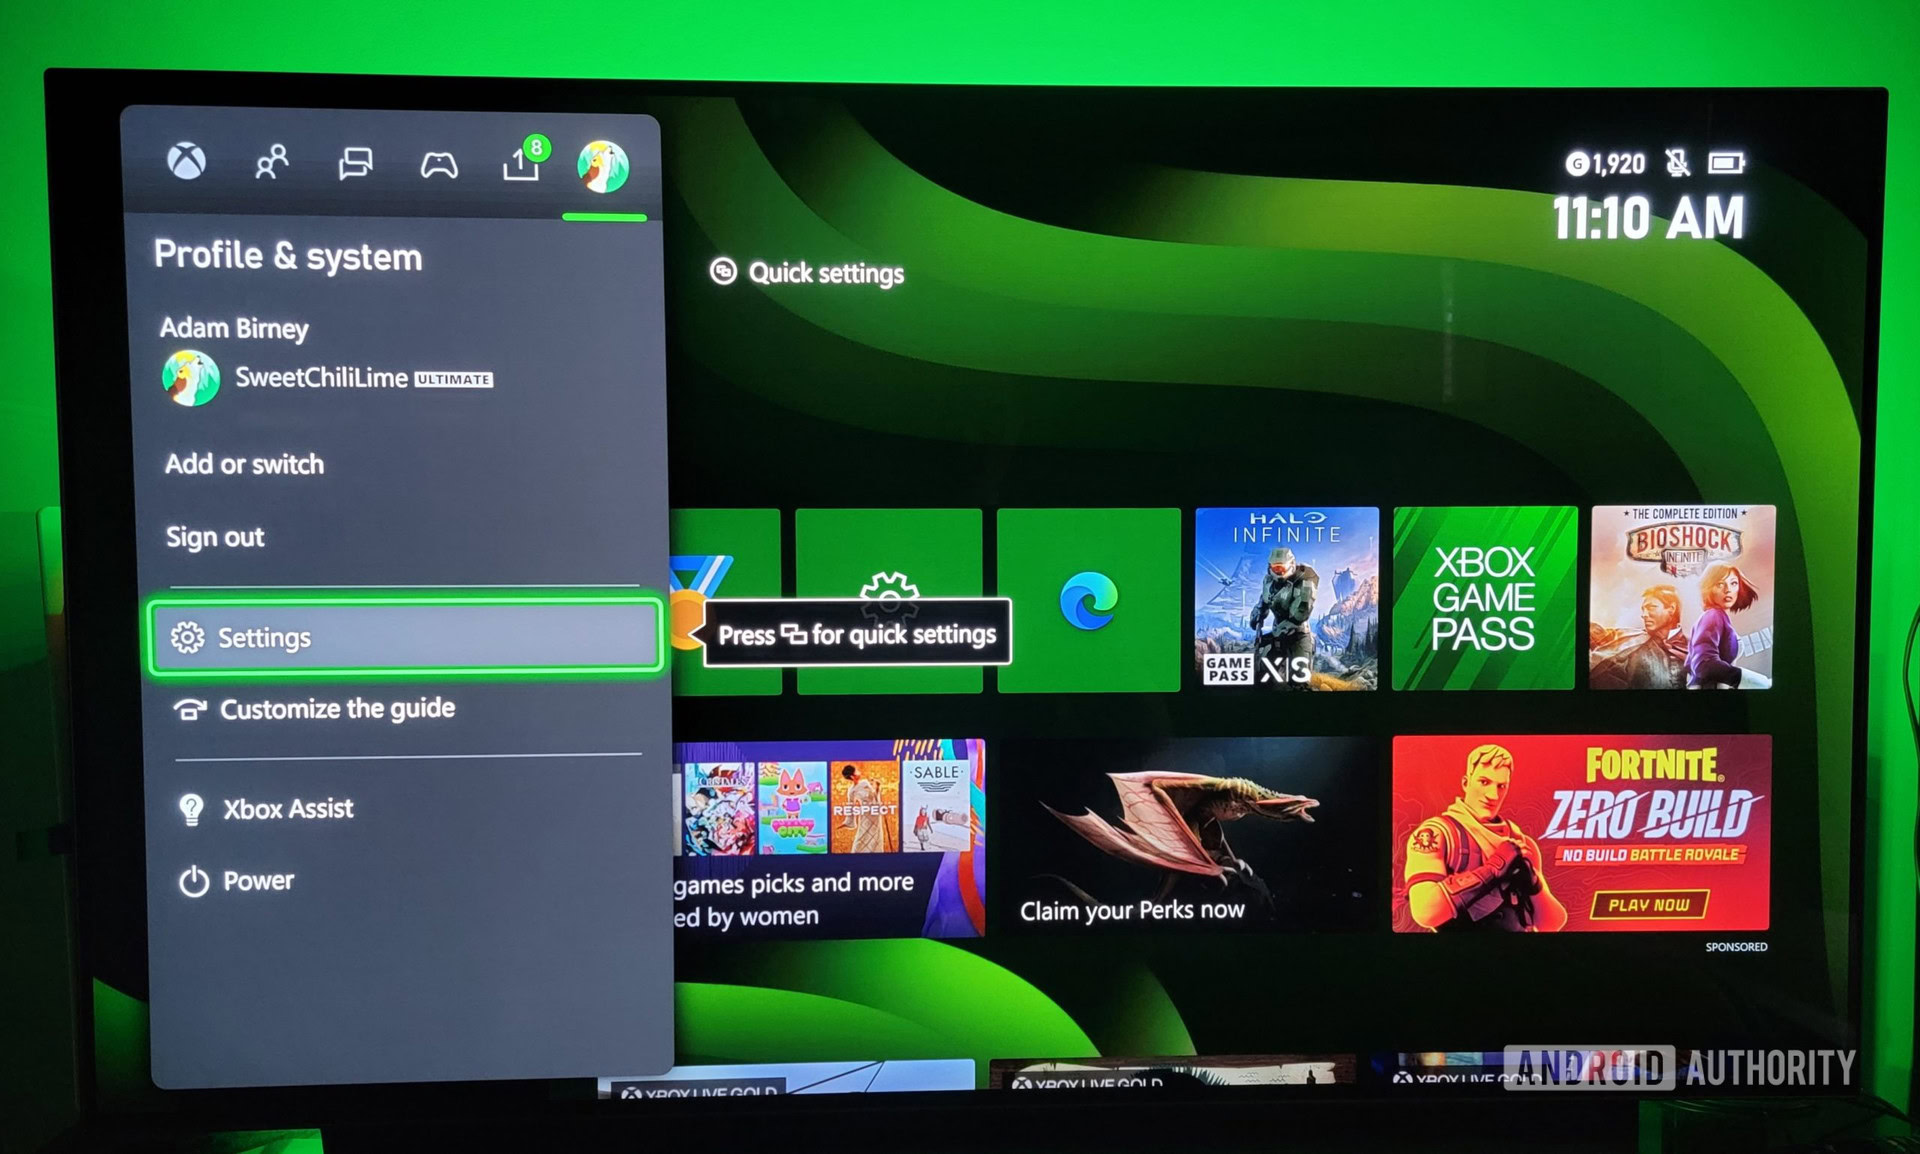 How to Get Fortnite on Xbox Series X or S